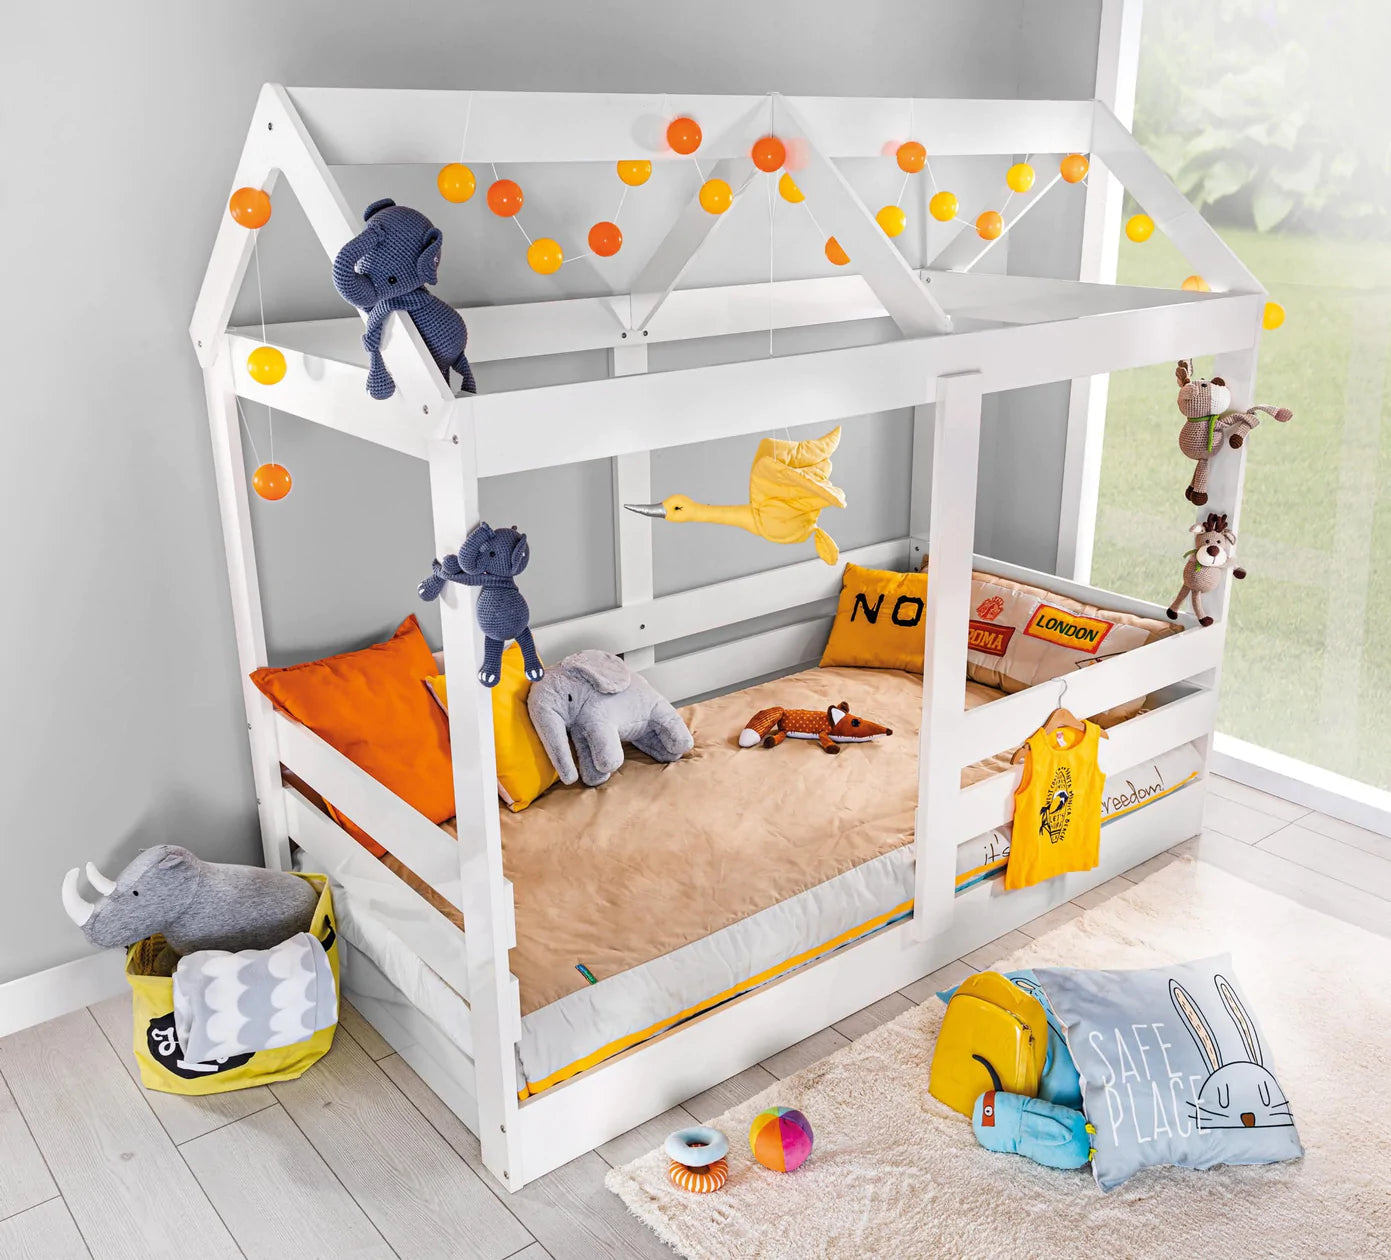 Things to consider when choosing a baby and children's room